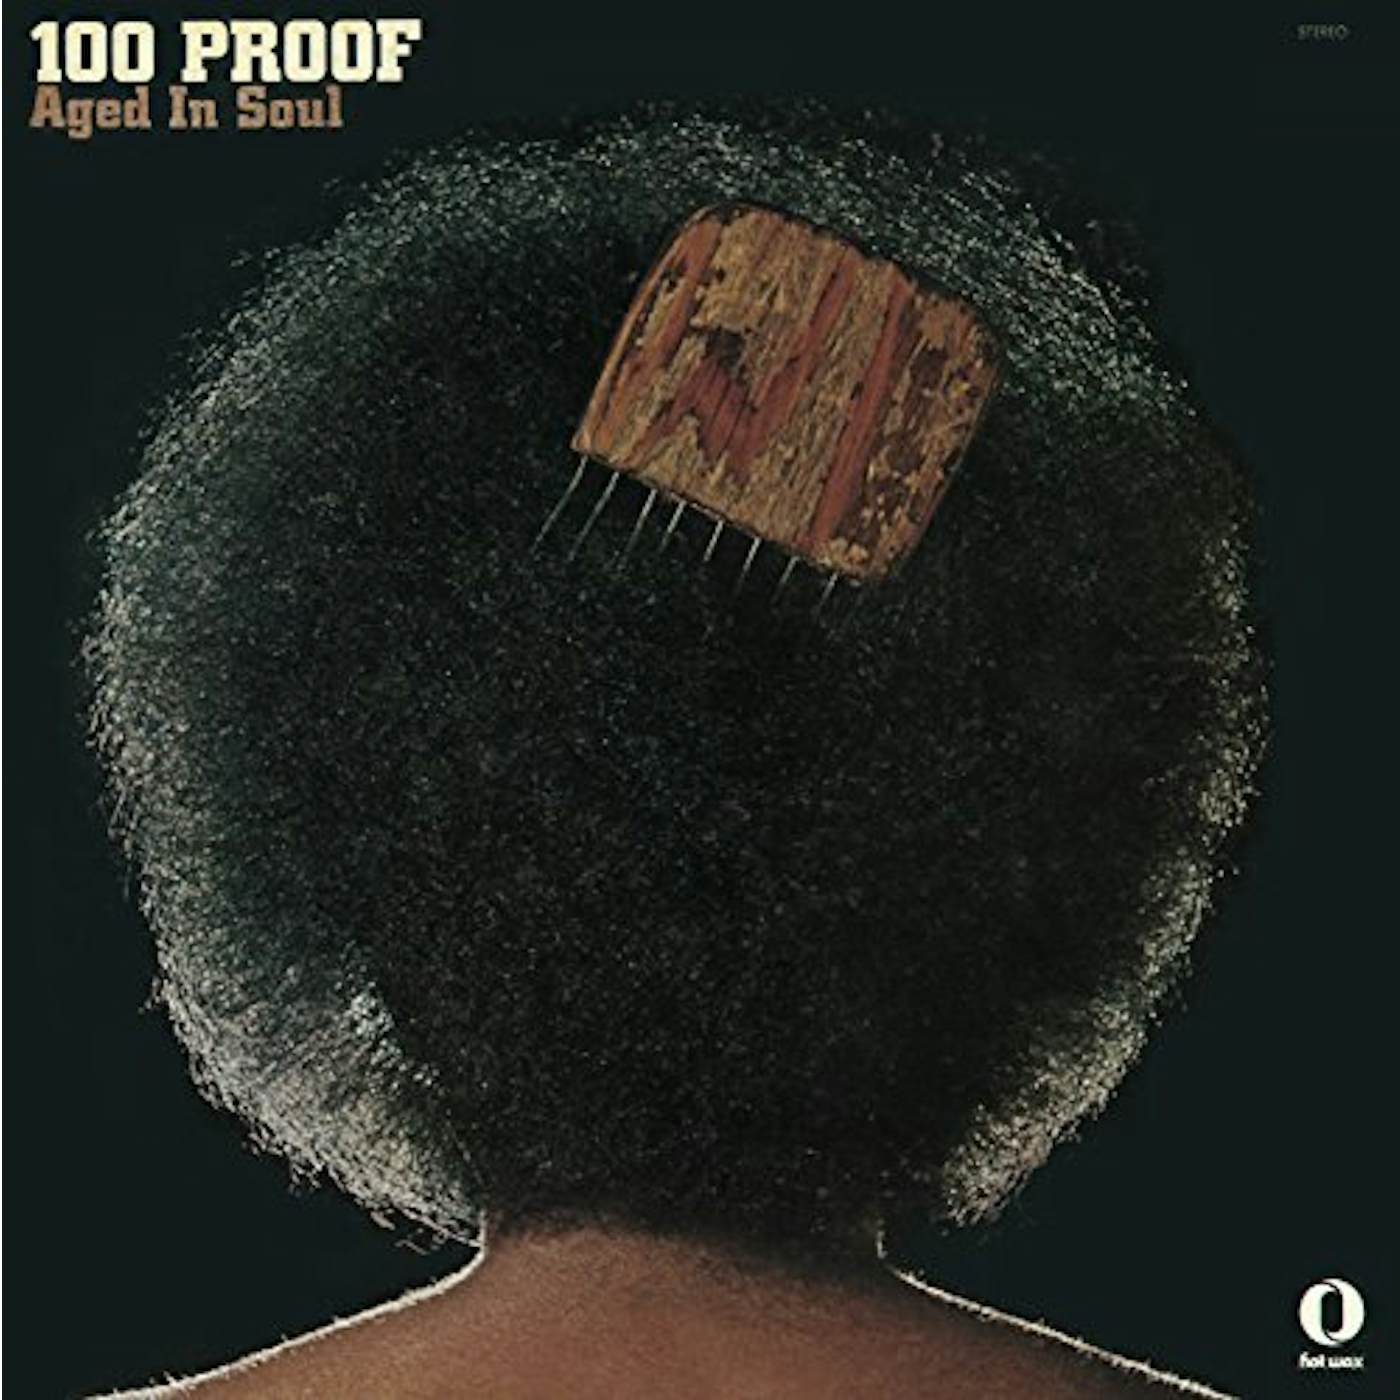 100 PROOF AGED IN SOUL CD